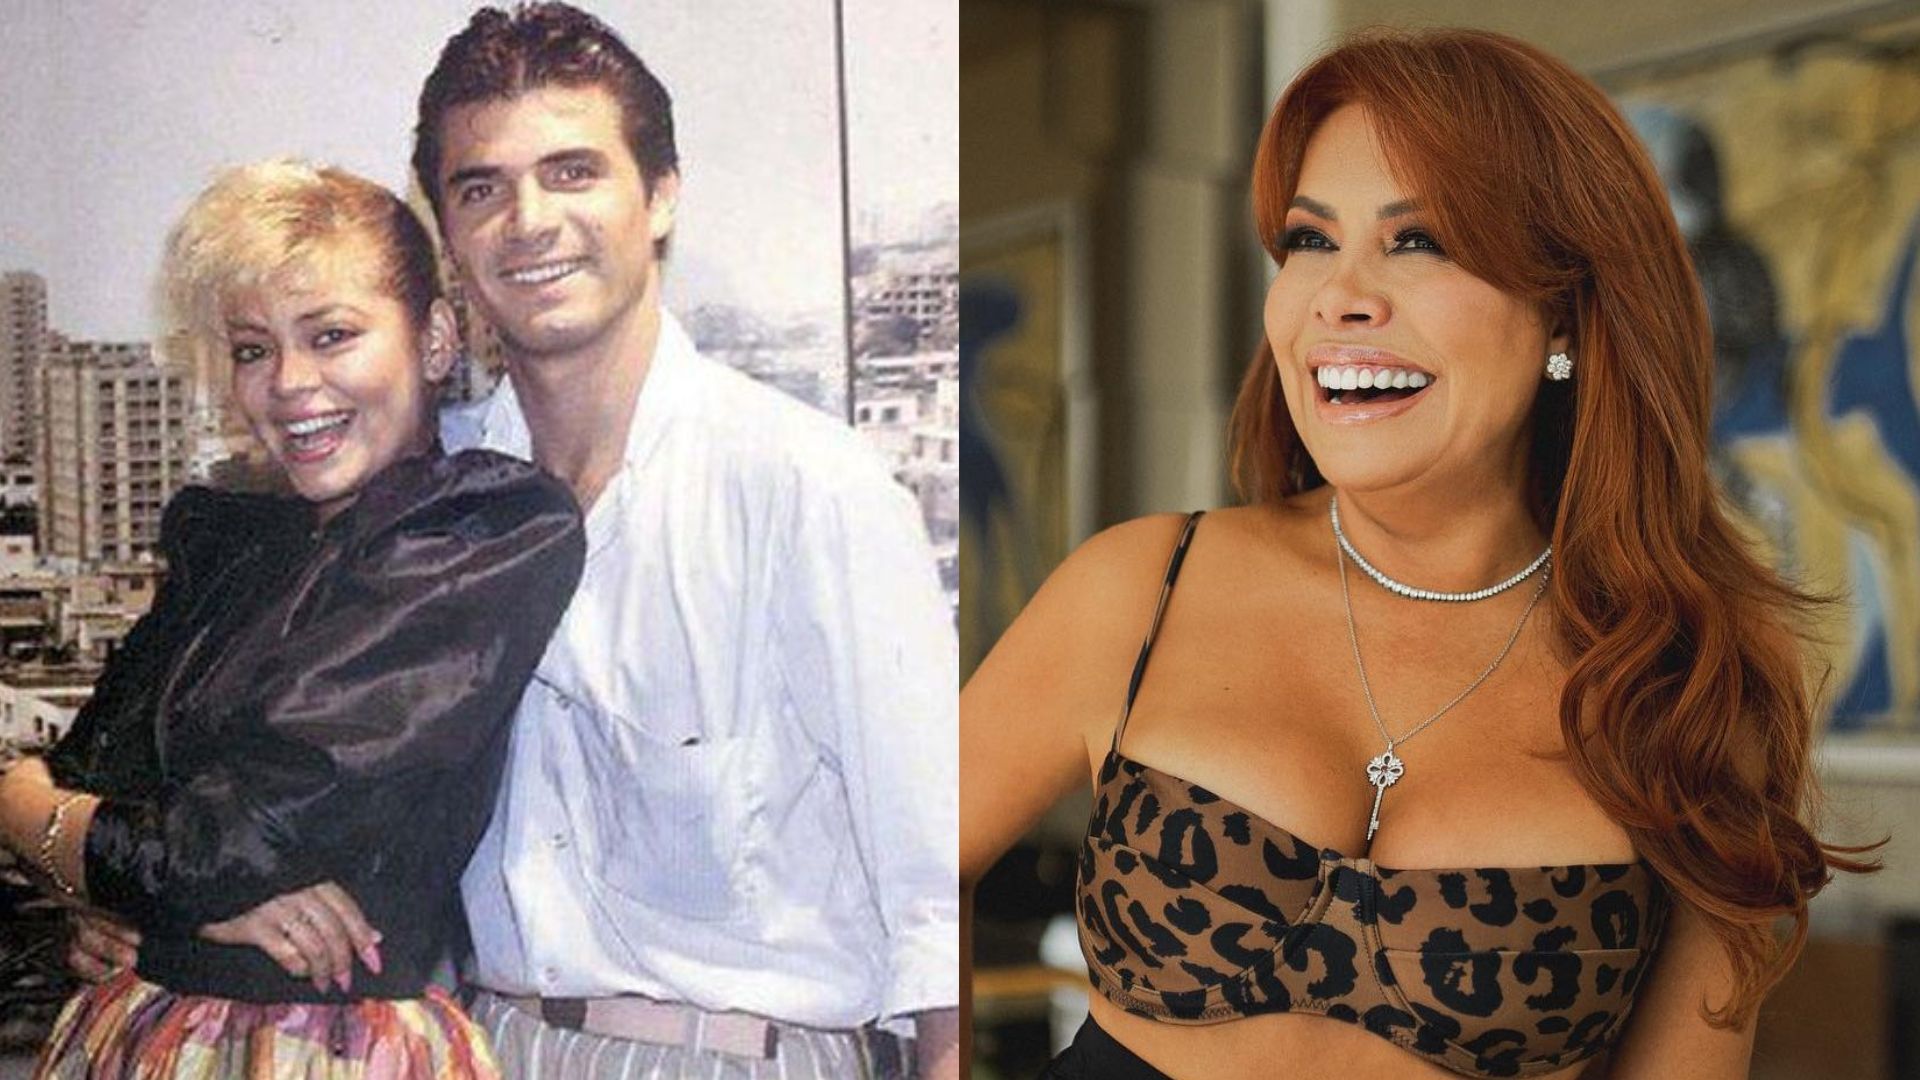 Carlos Vidal is considering suing Magaly Medina for referring to him on his show program.